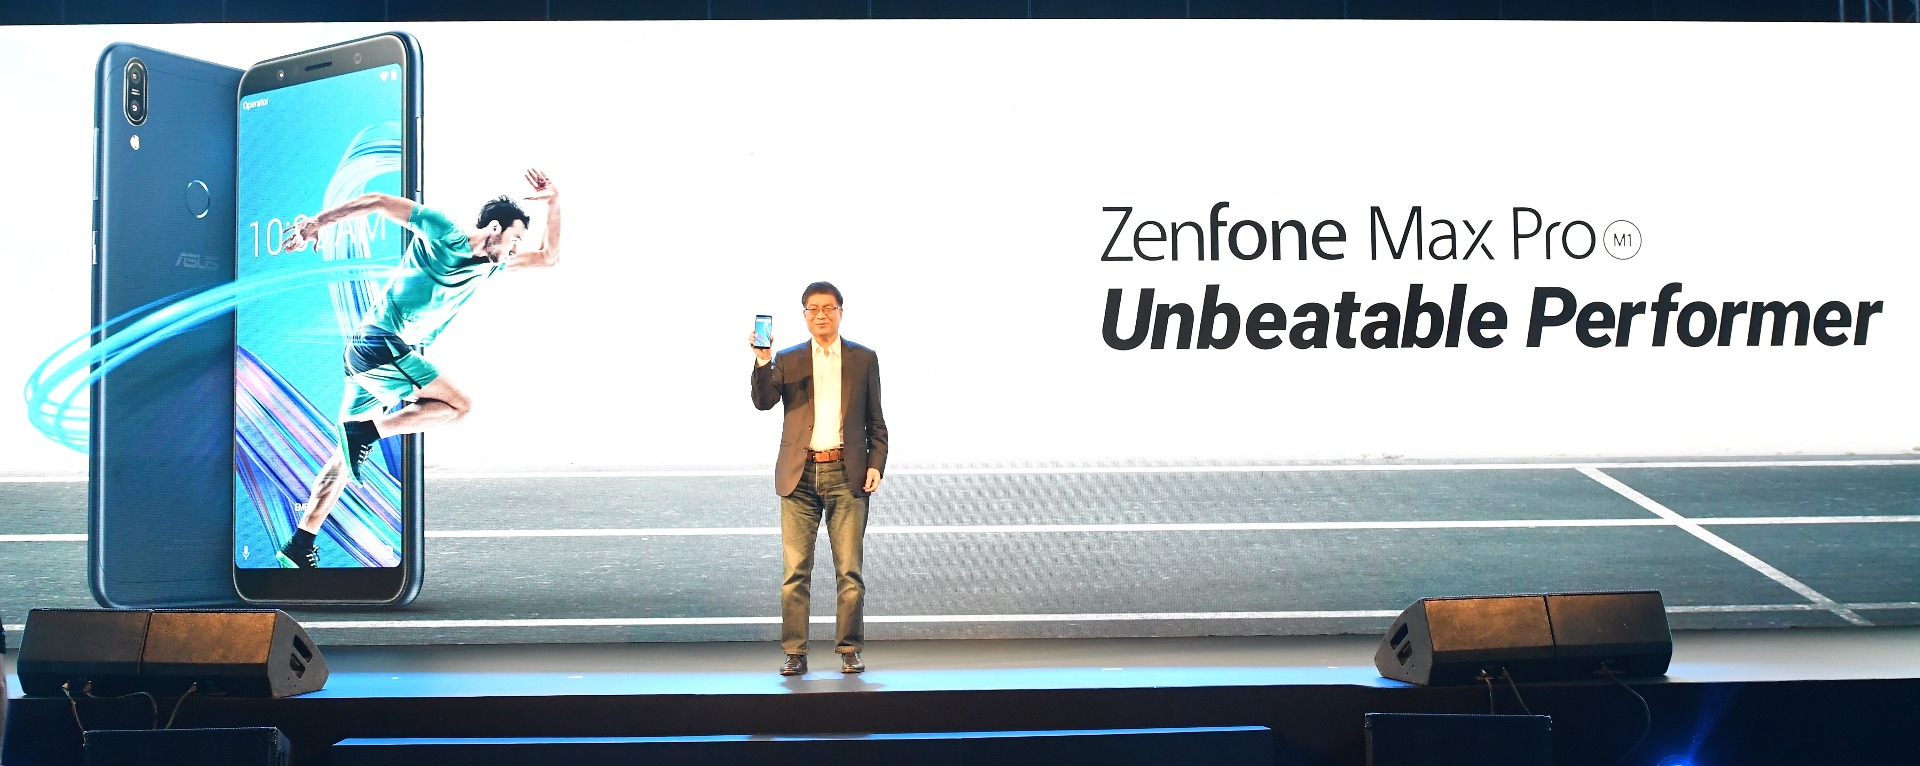 ASUS CEO Jerry Shen reveals the all new ZenFone Max Pro_the game changing unbeatable